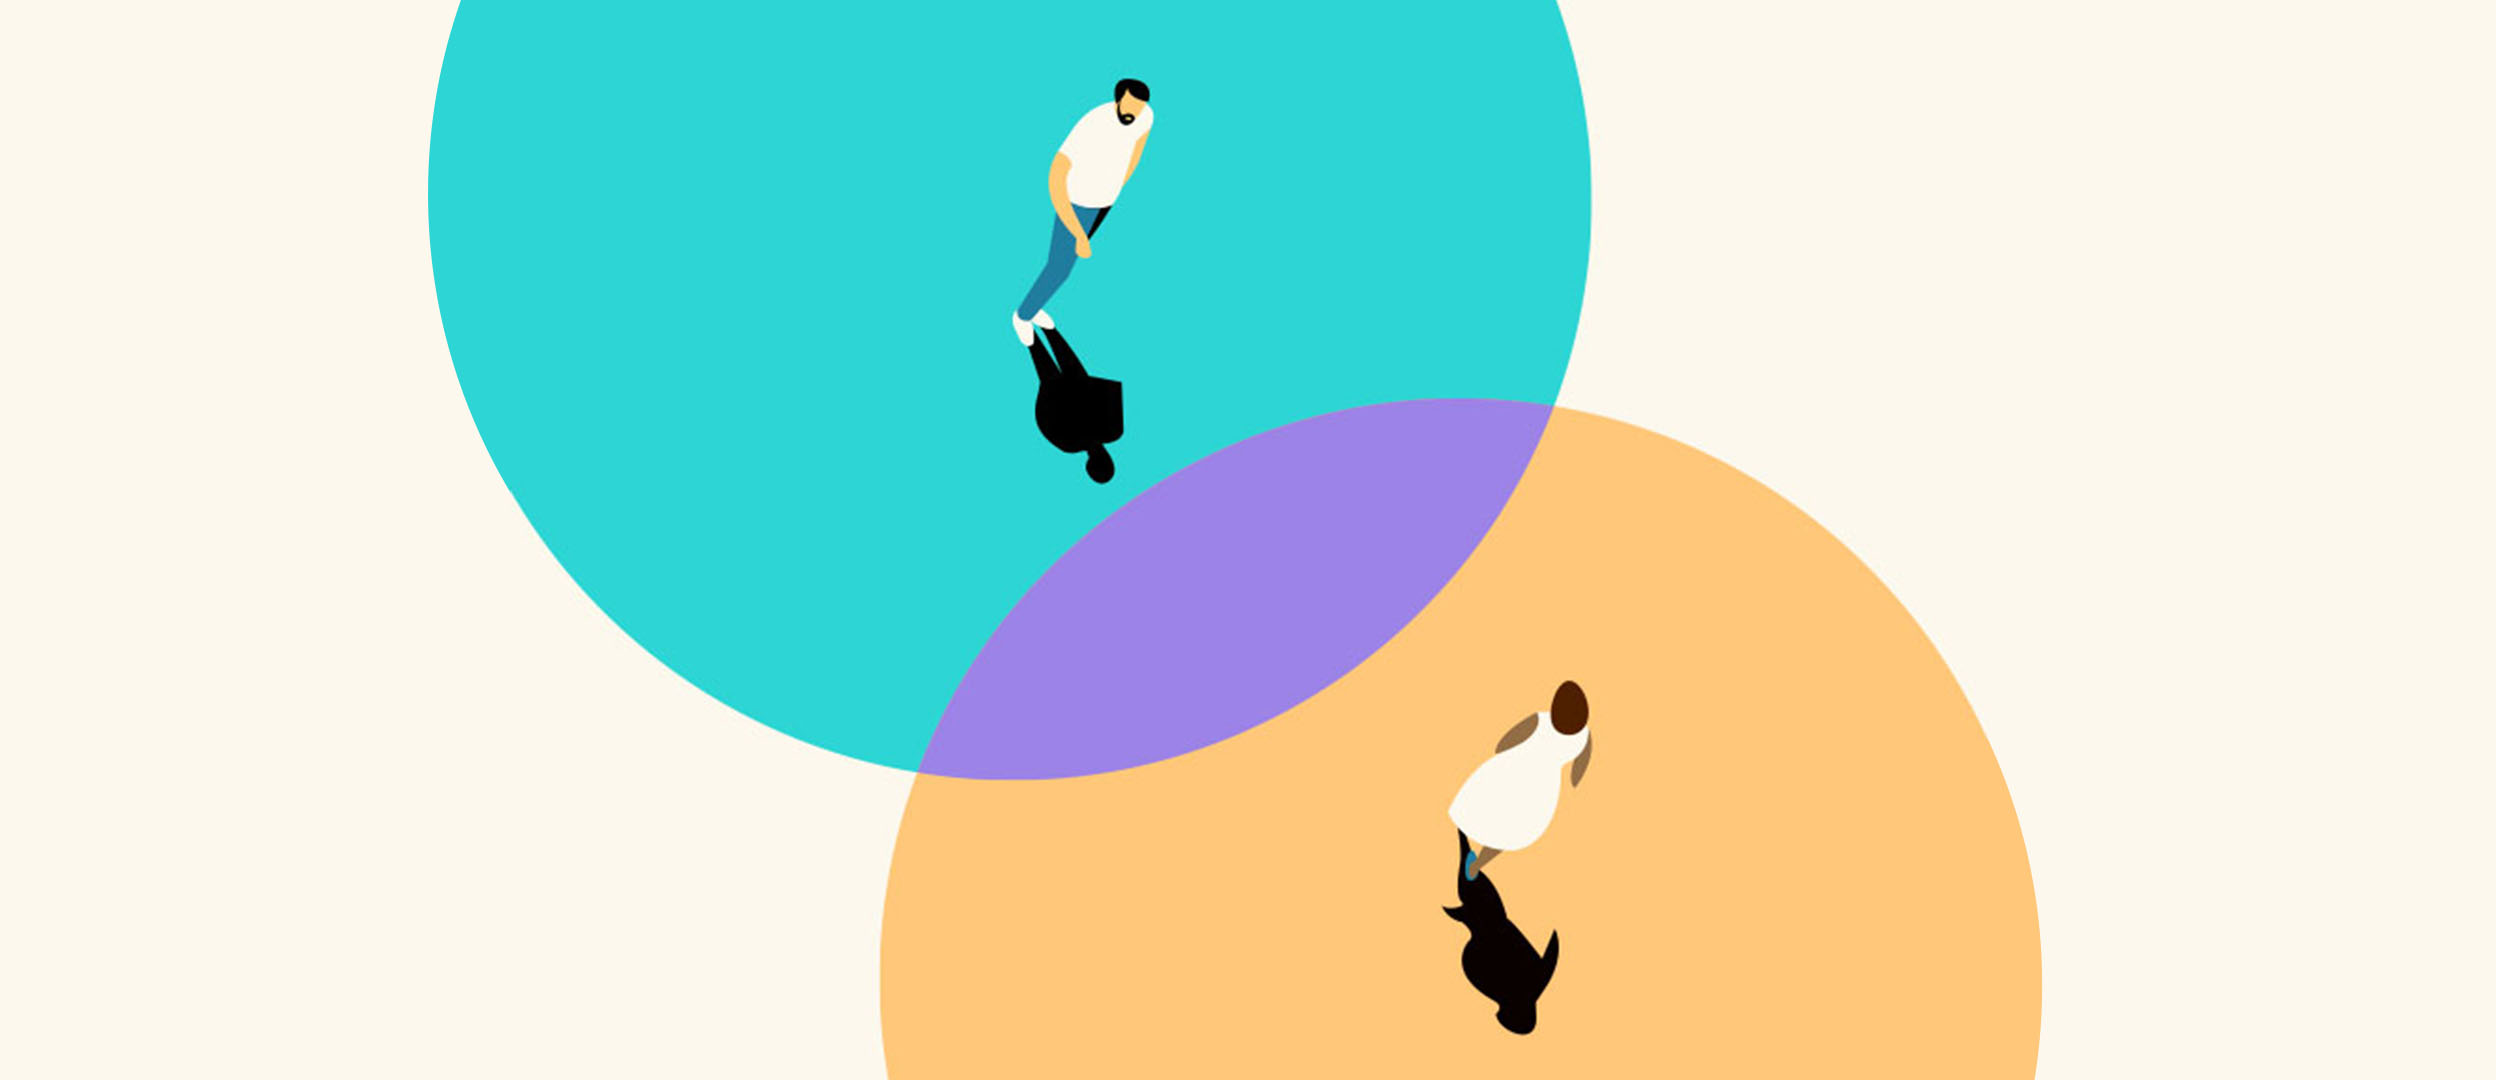 Illustration of a man and a woman standing in separate-colored circles with an overlap of another color in between them